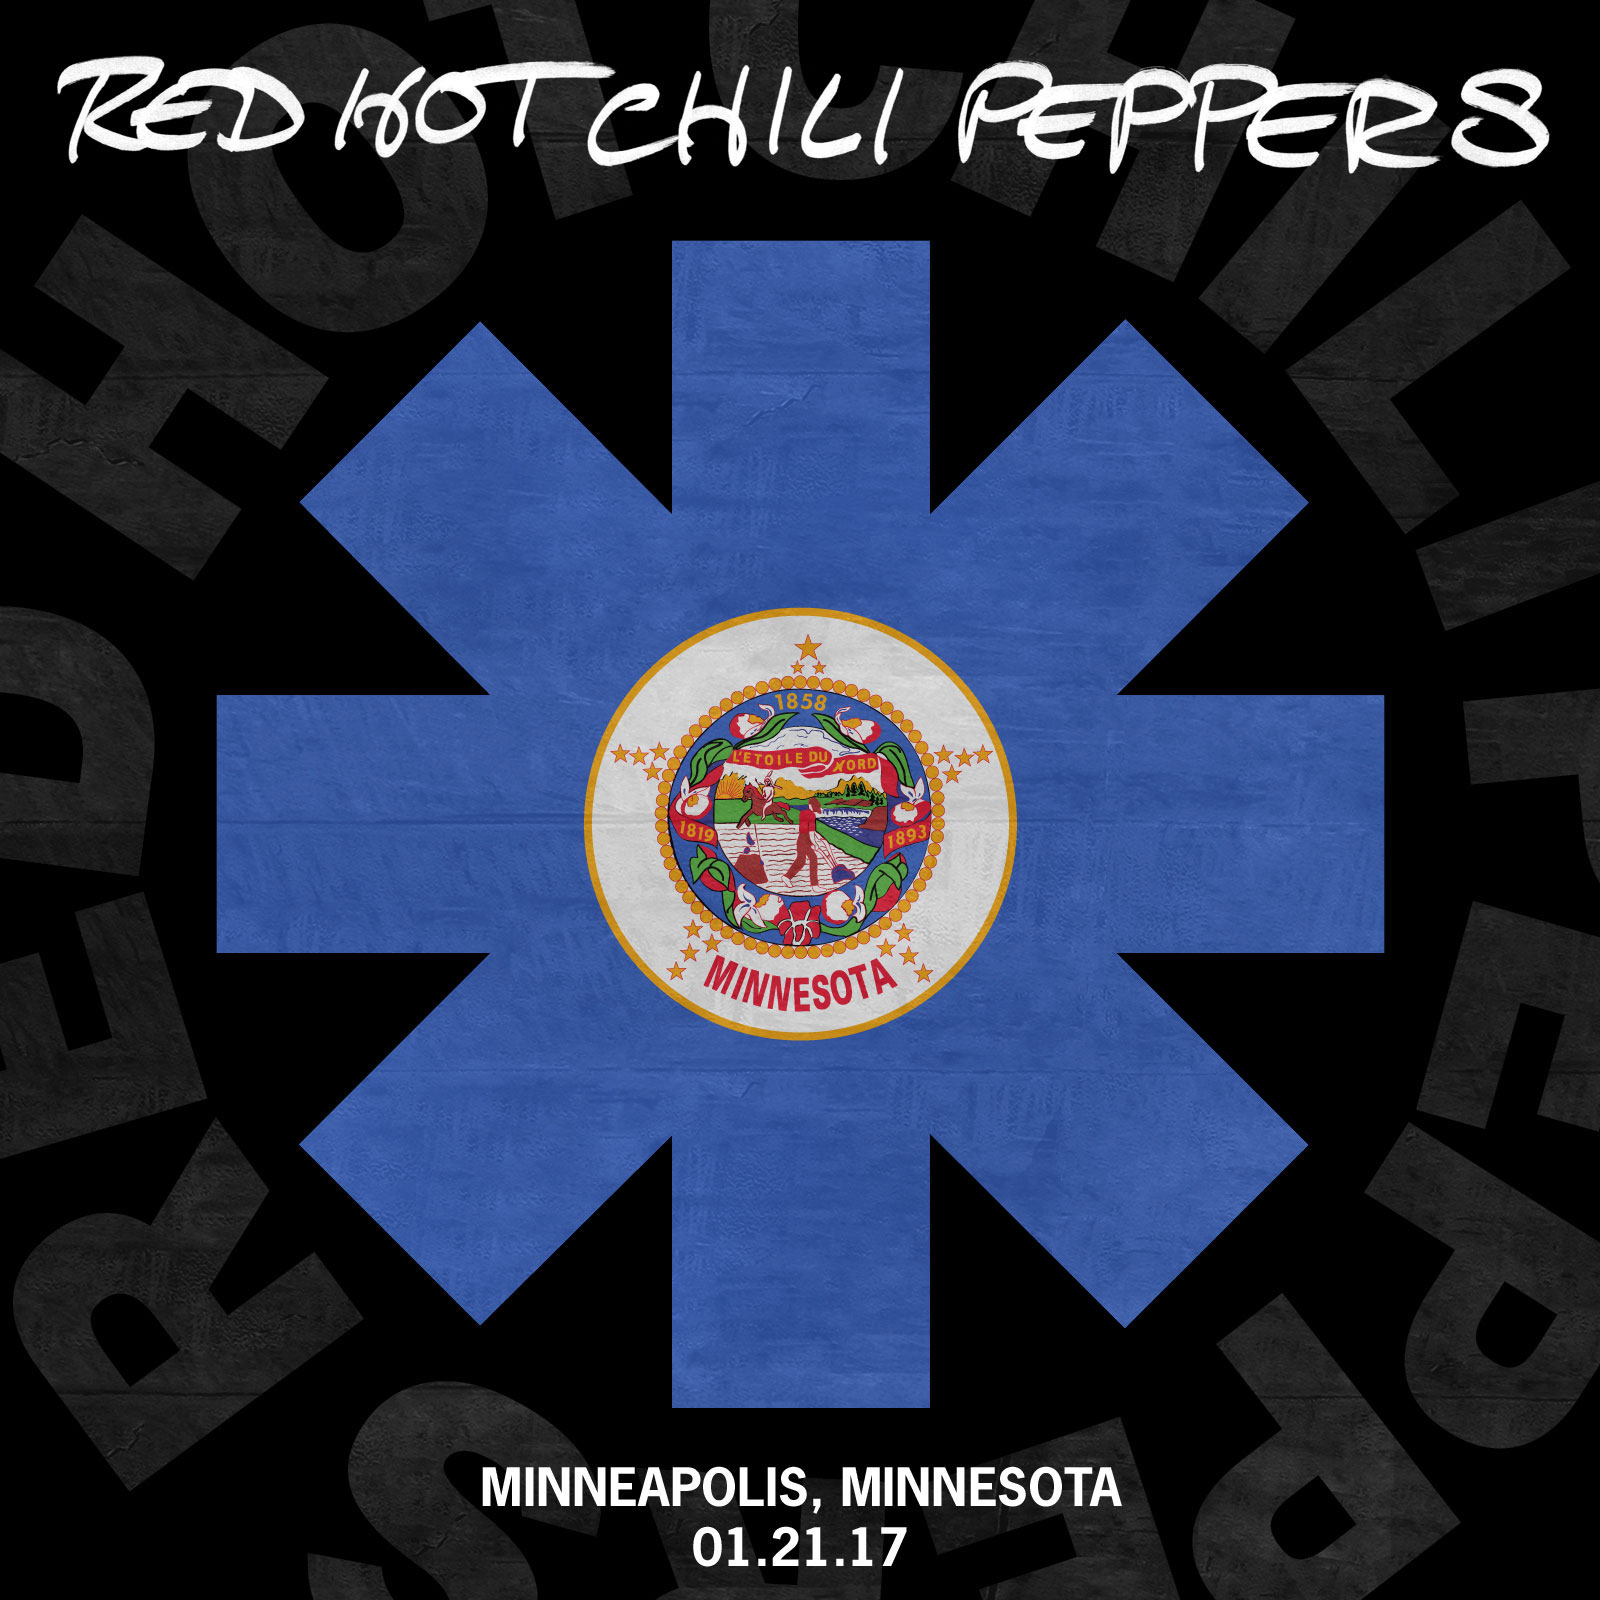 Red hot chili peppers mp3. Scar Tissue Red hot Chili Peppers. RHCP scar Tissue. Патч Red hot Chili Peppers. RHCP Californication.